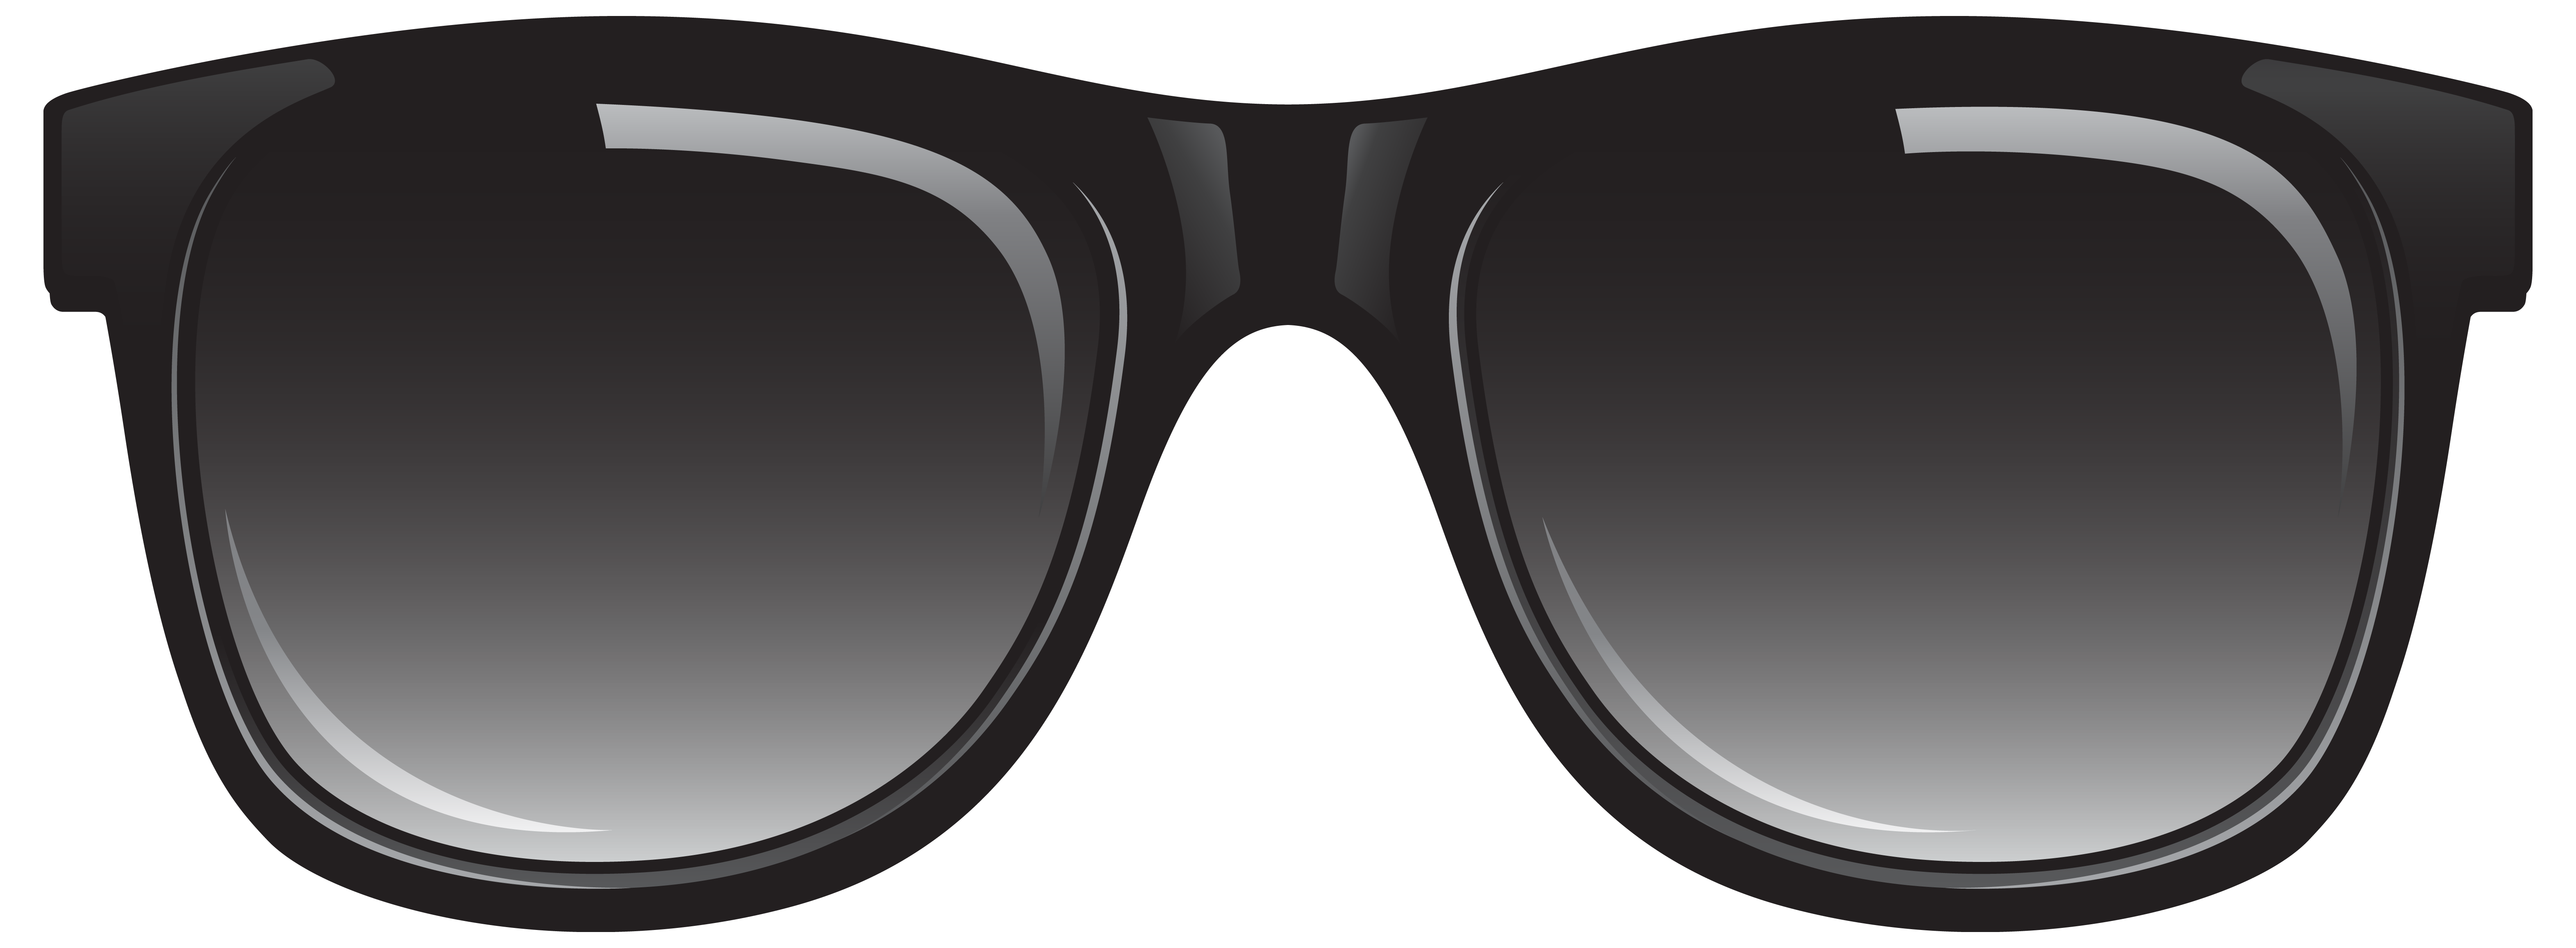 Black image gallery yopriceville. Clipart png sunglasses